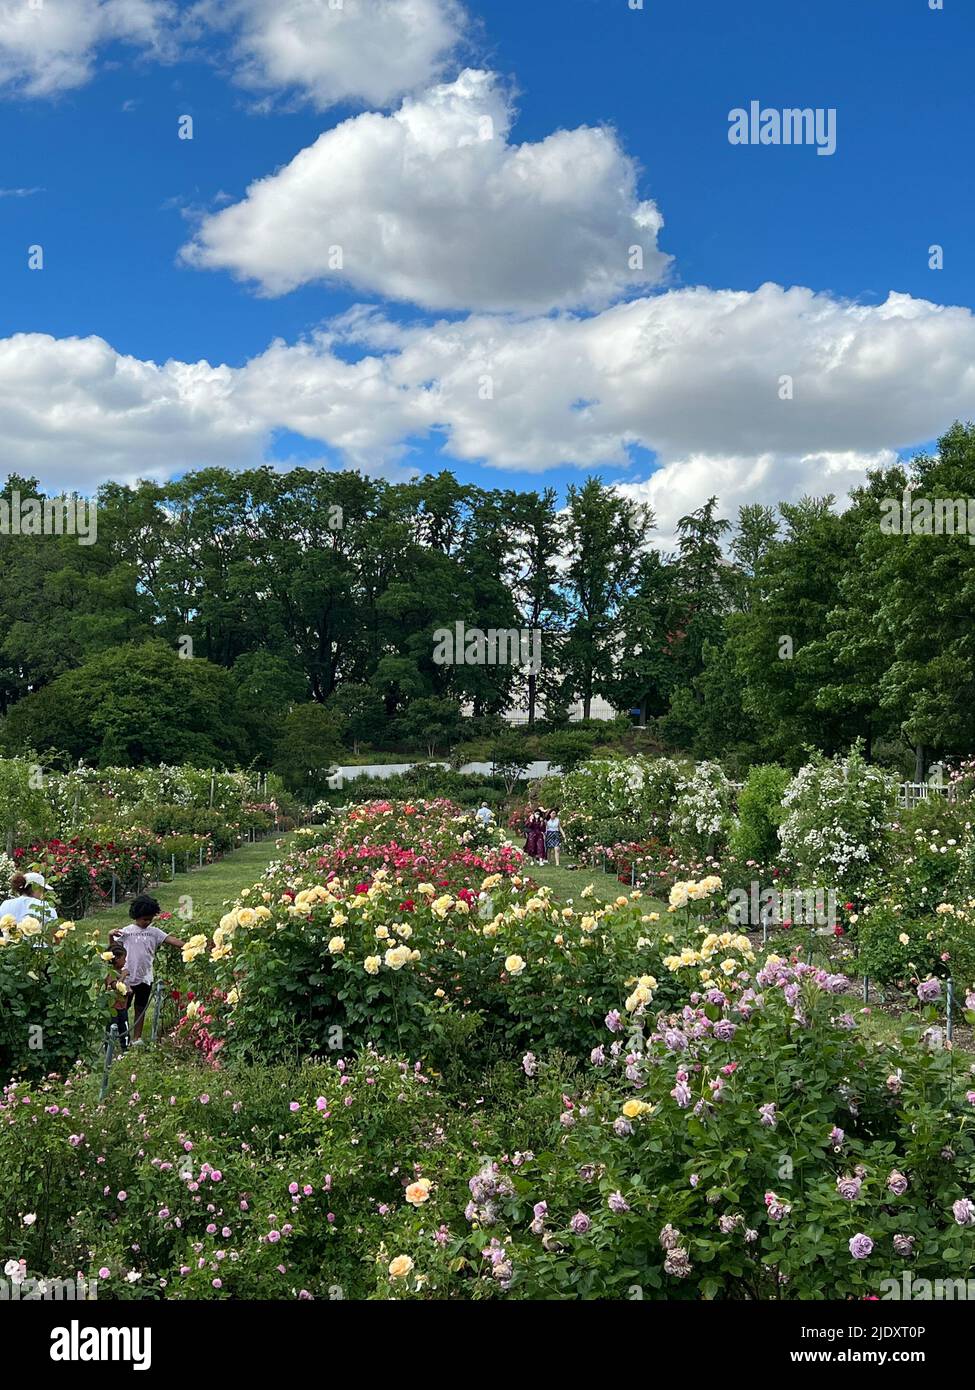 Dramatic sky over the Cranford Rose Garden at the Brooklyn Botanic Garden in New York City.  With over 1000 species Cranford is one of the largest rose gardens in North America. Stock Photo